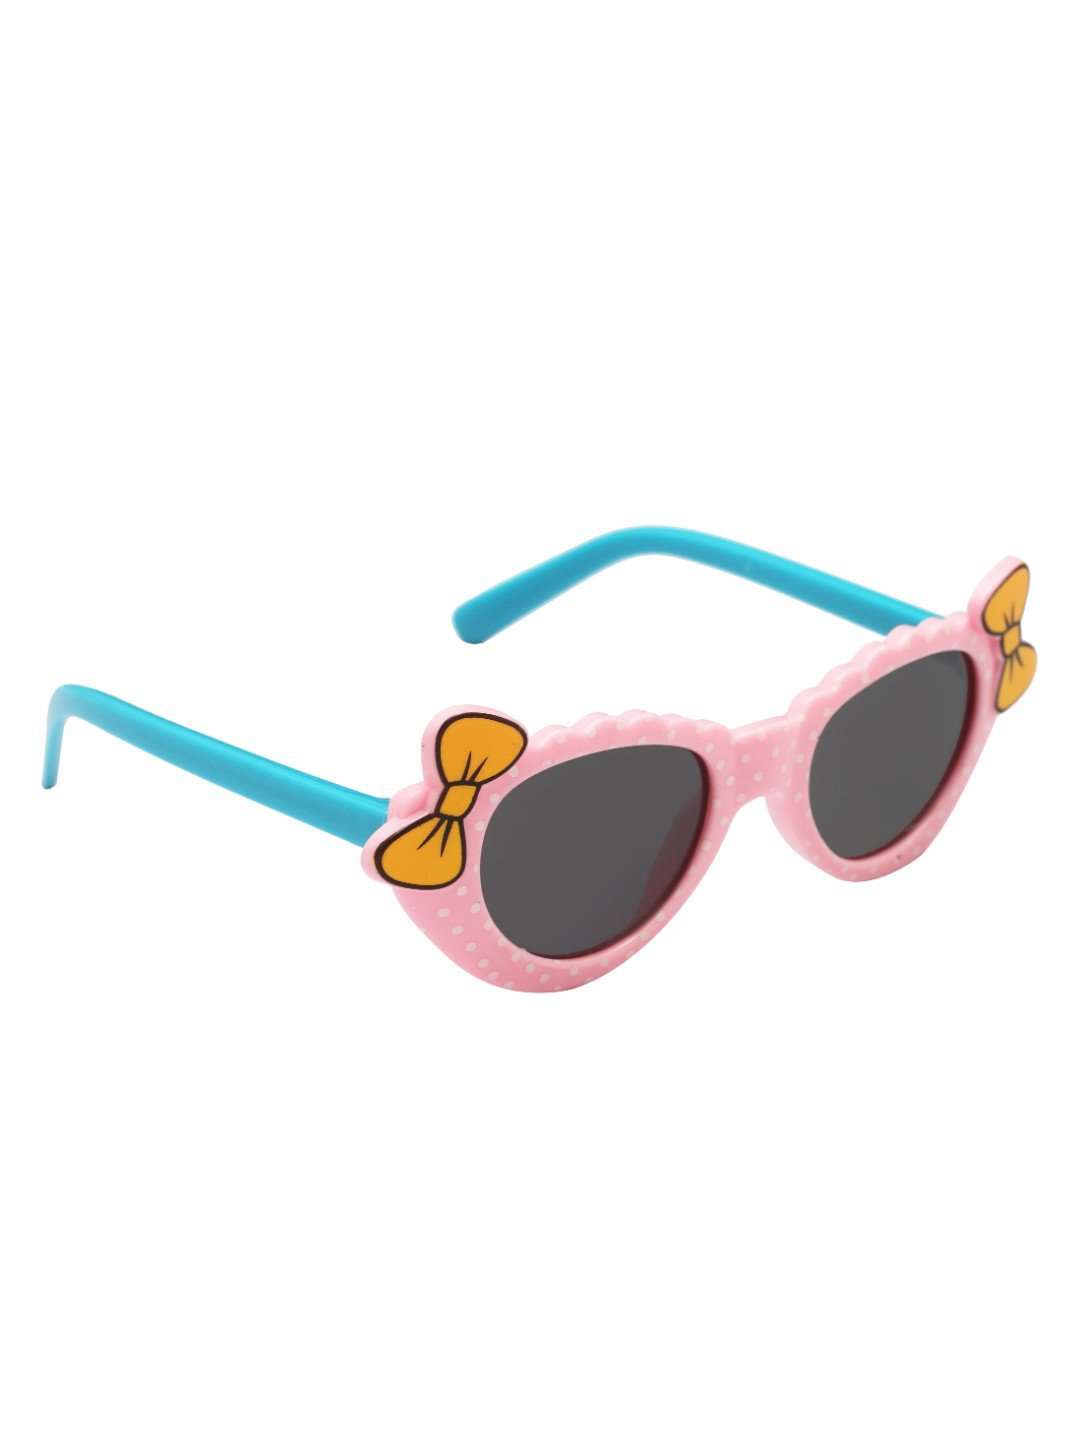 Stol'n Kids Pink and Blue Bow Cat Eye Sunglasses - SWHF